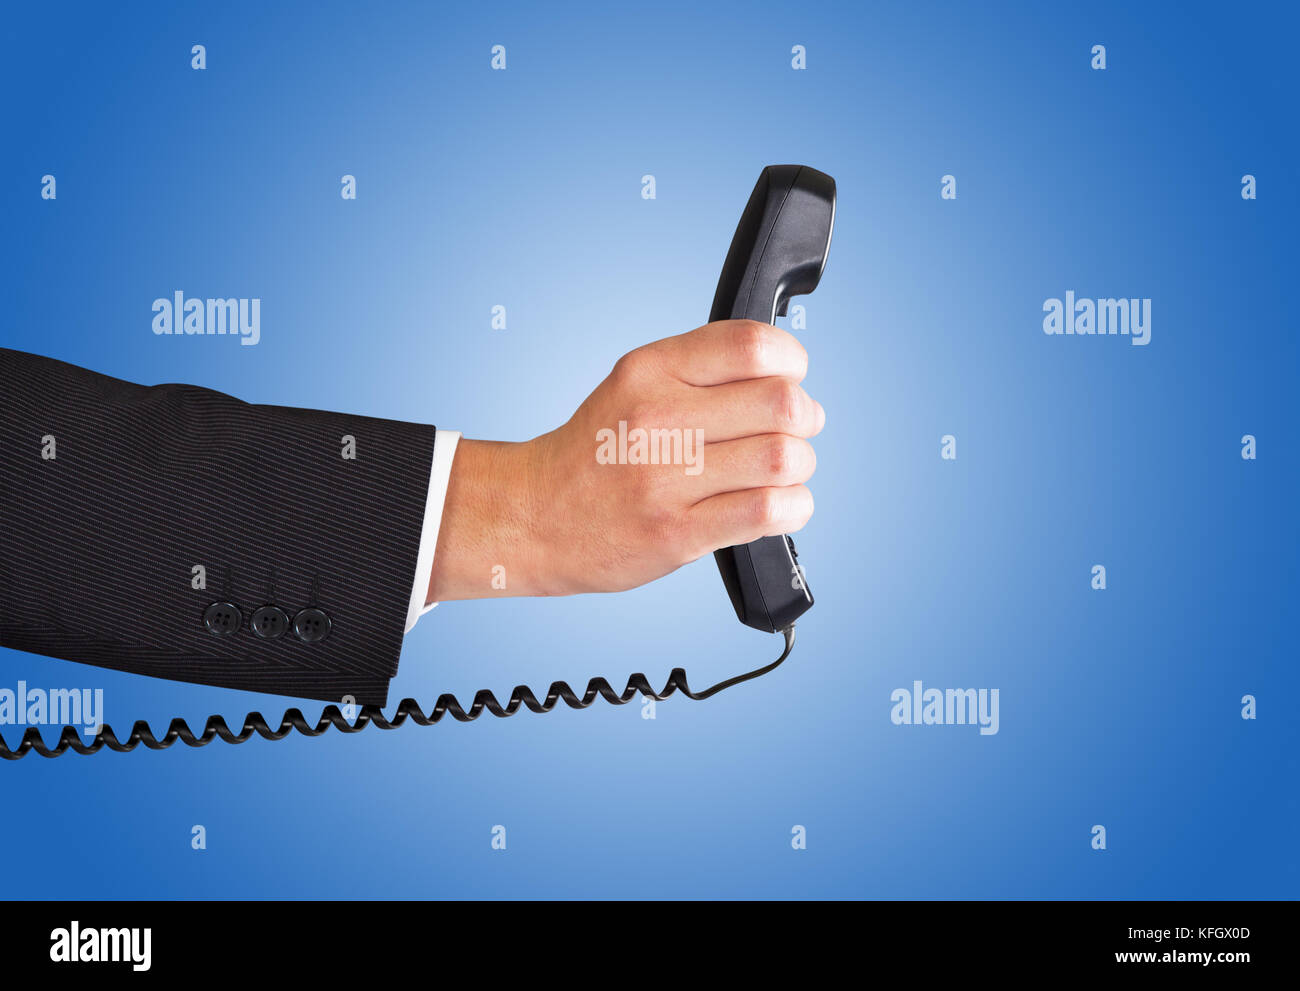 Closeup of businessman's hand holding telephone receiver against blue background Stock Photo